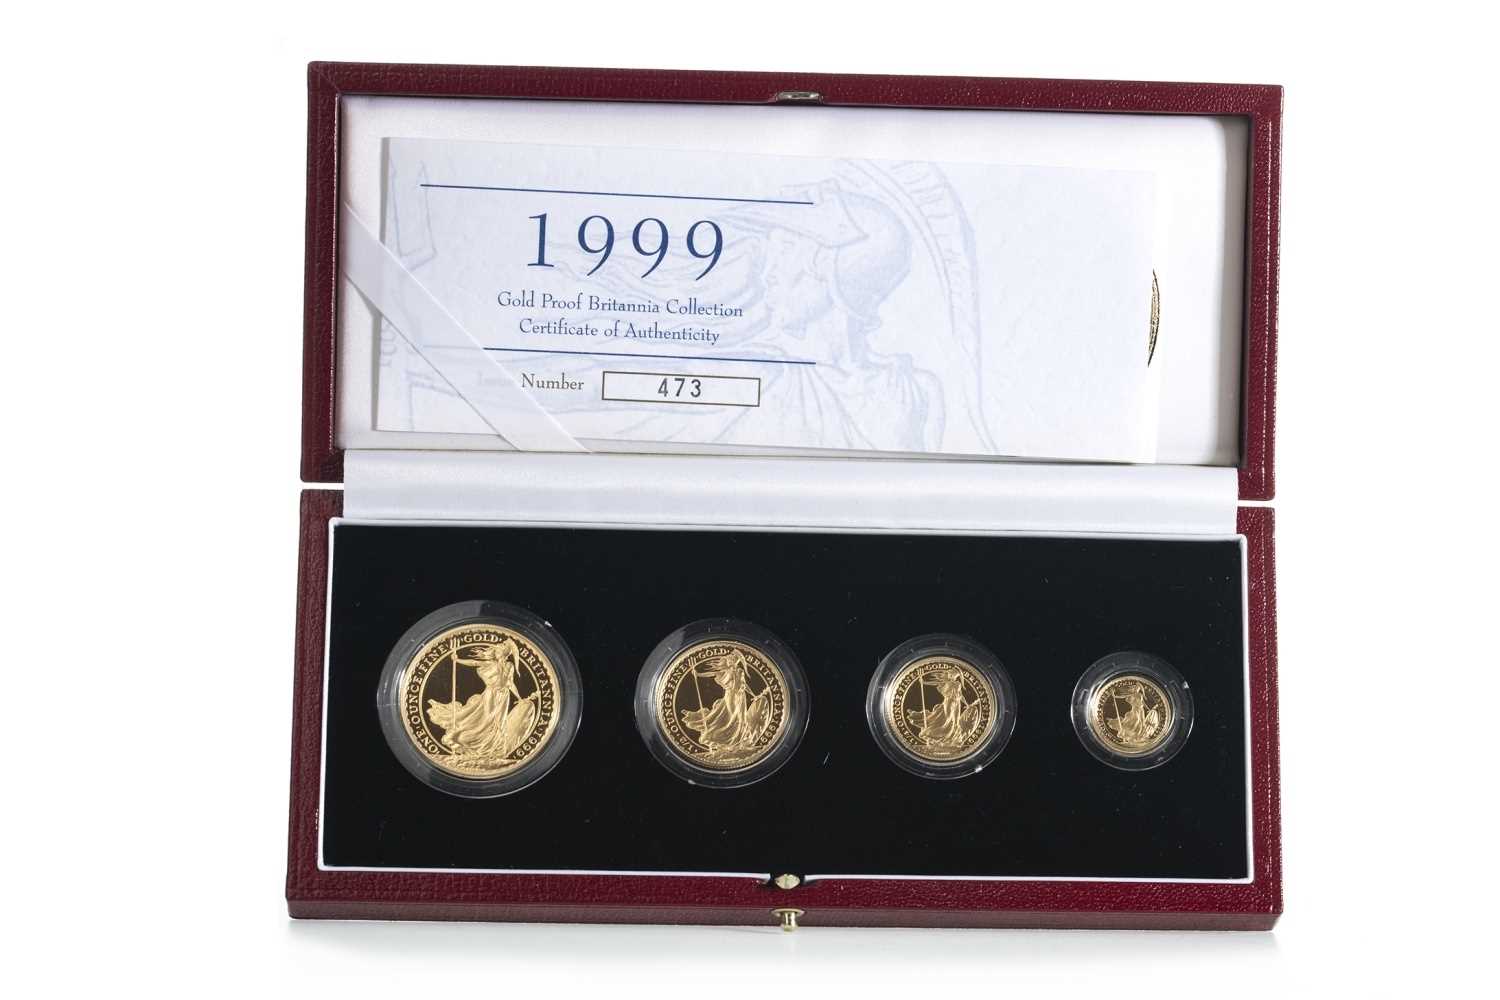 Lot 29 - 1999 GOLD PROOF BRITANNIA COLLECTION FOUR COIN SET